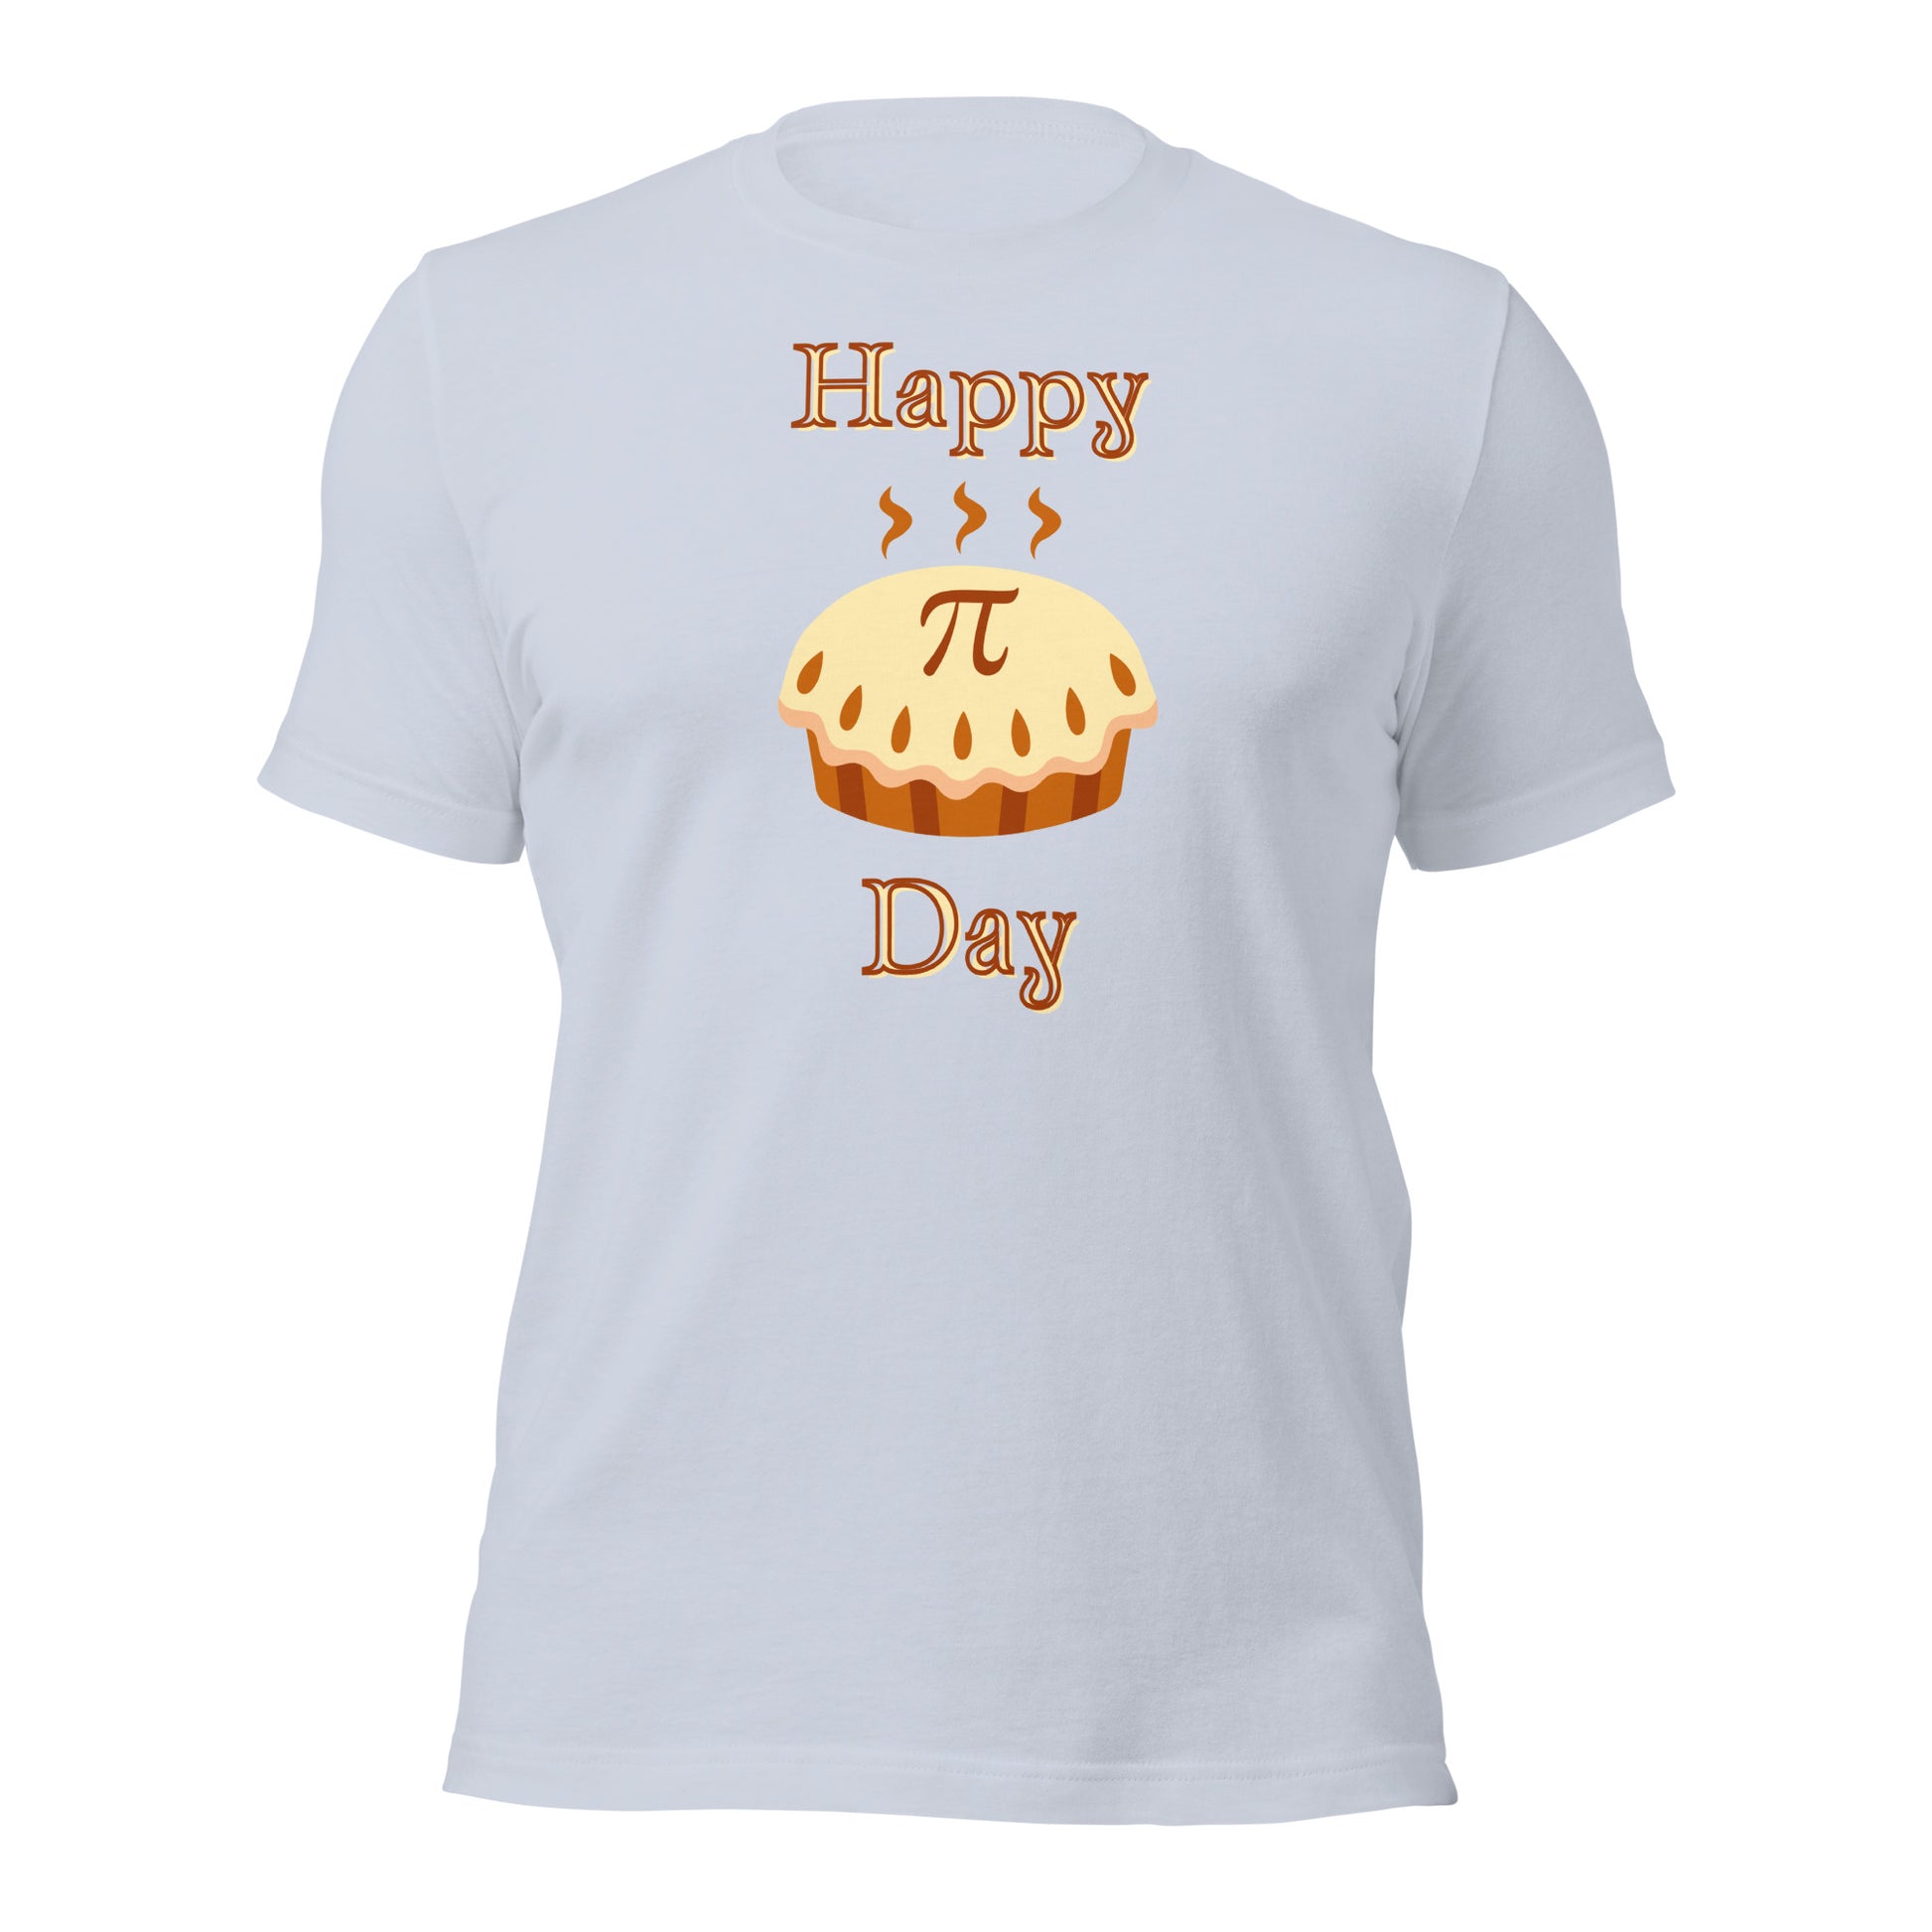 Comfortable and breathable cotton Pi Day shirt